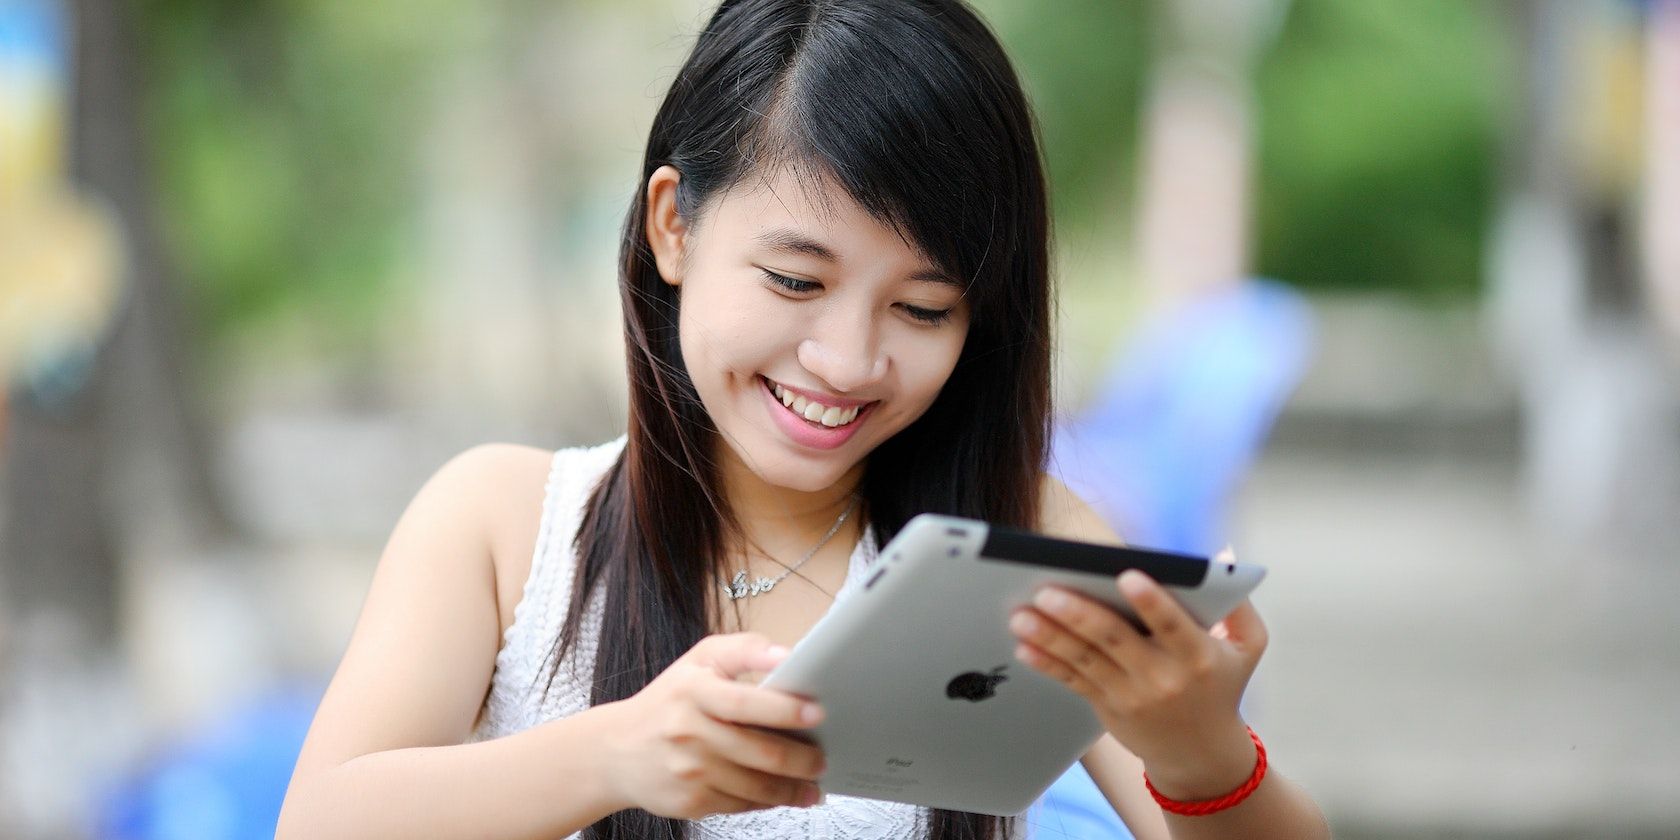 A woman holding white iPad and smiling